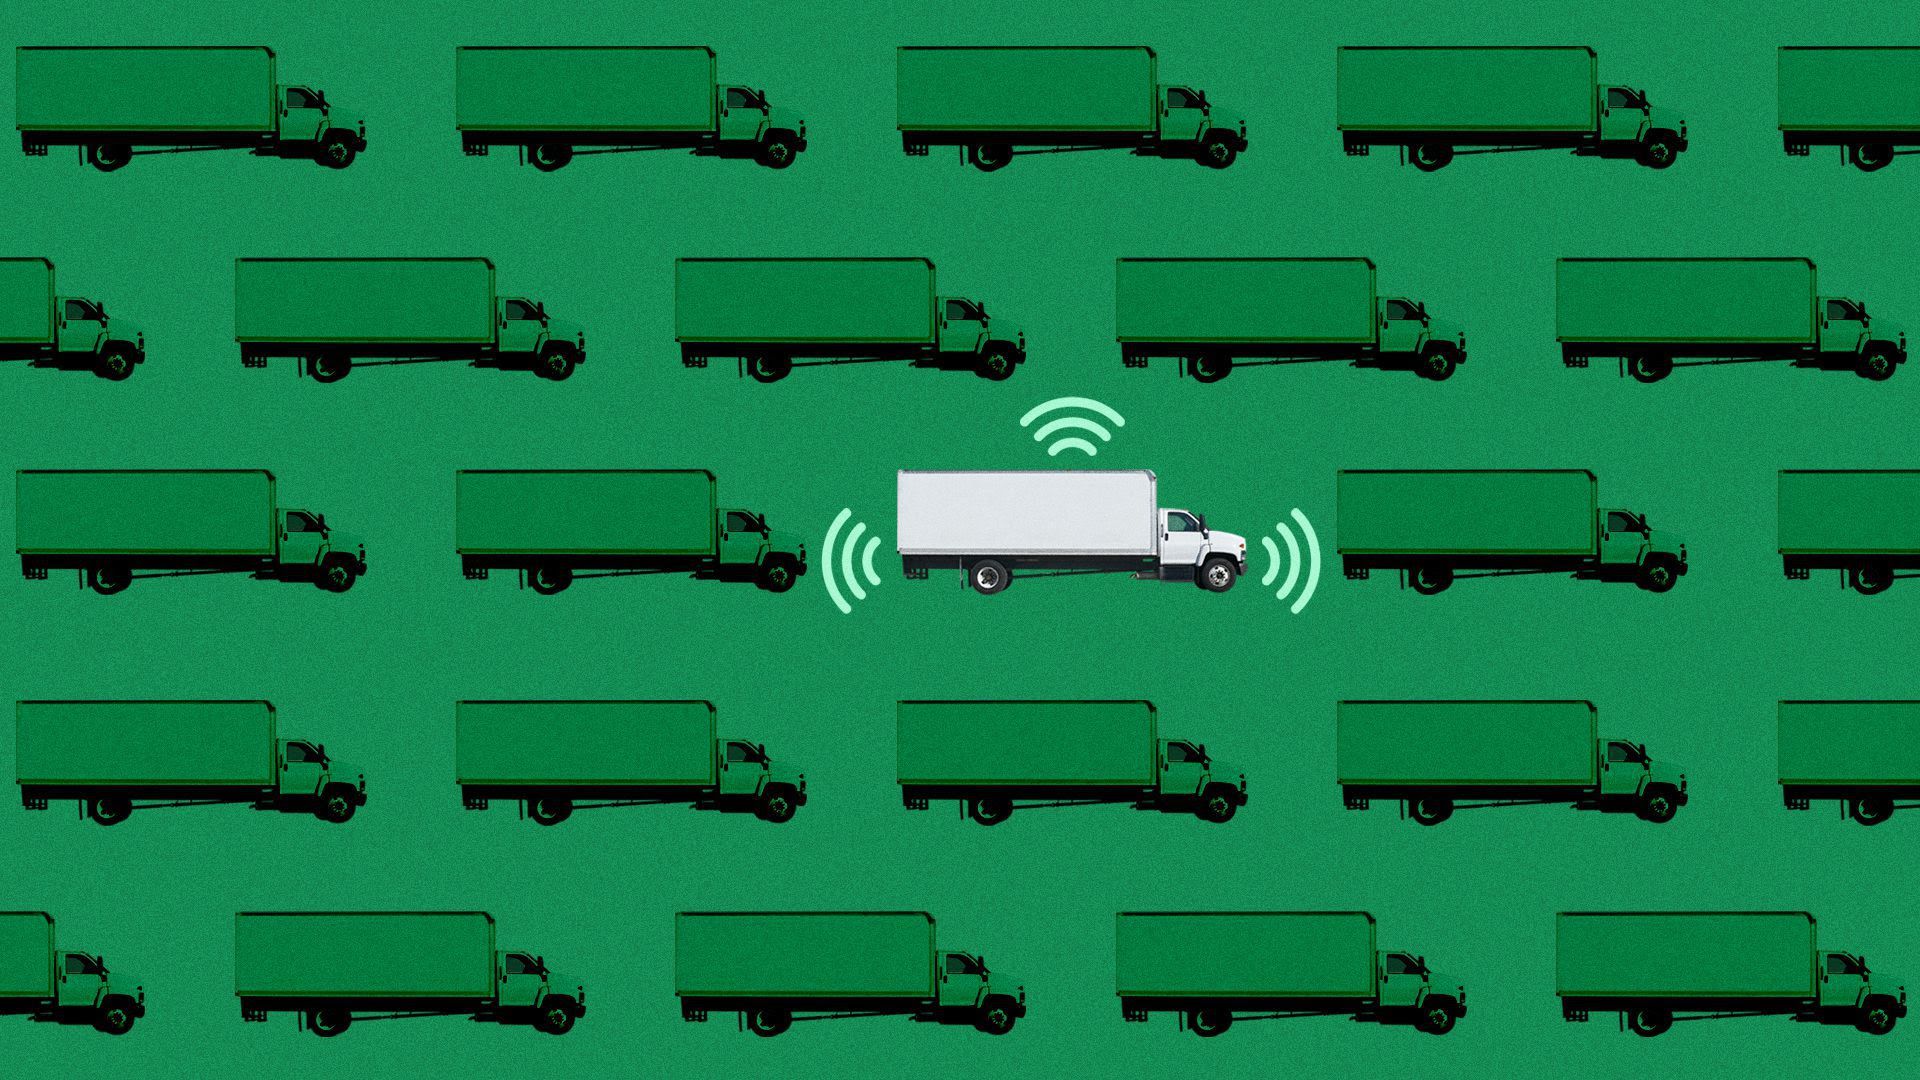 Illustration of a truck emitting a wifi signal around other trucks